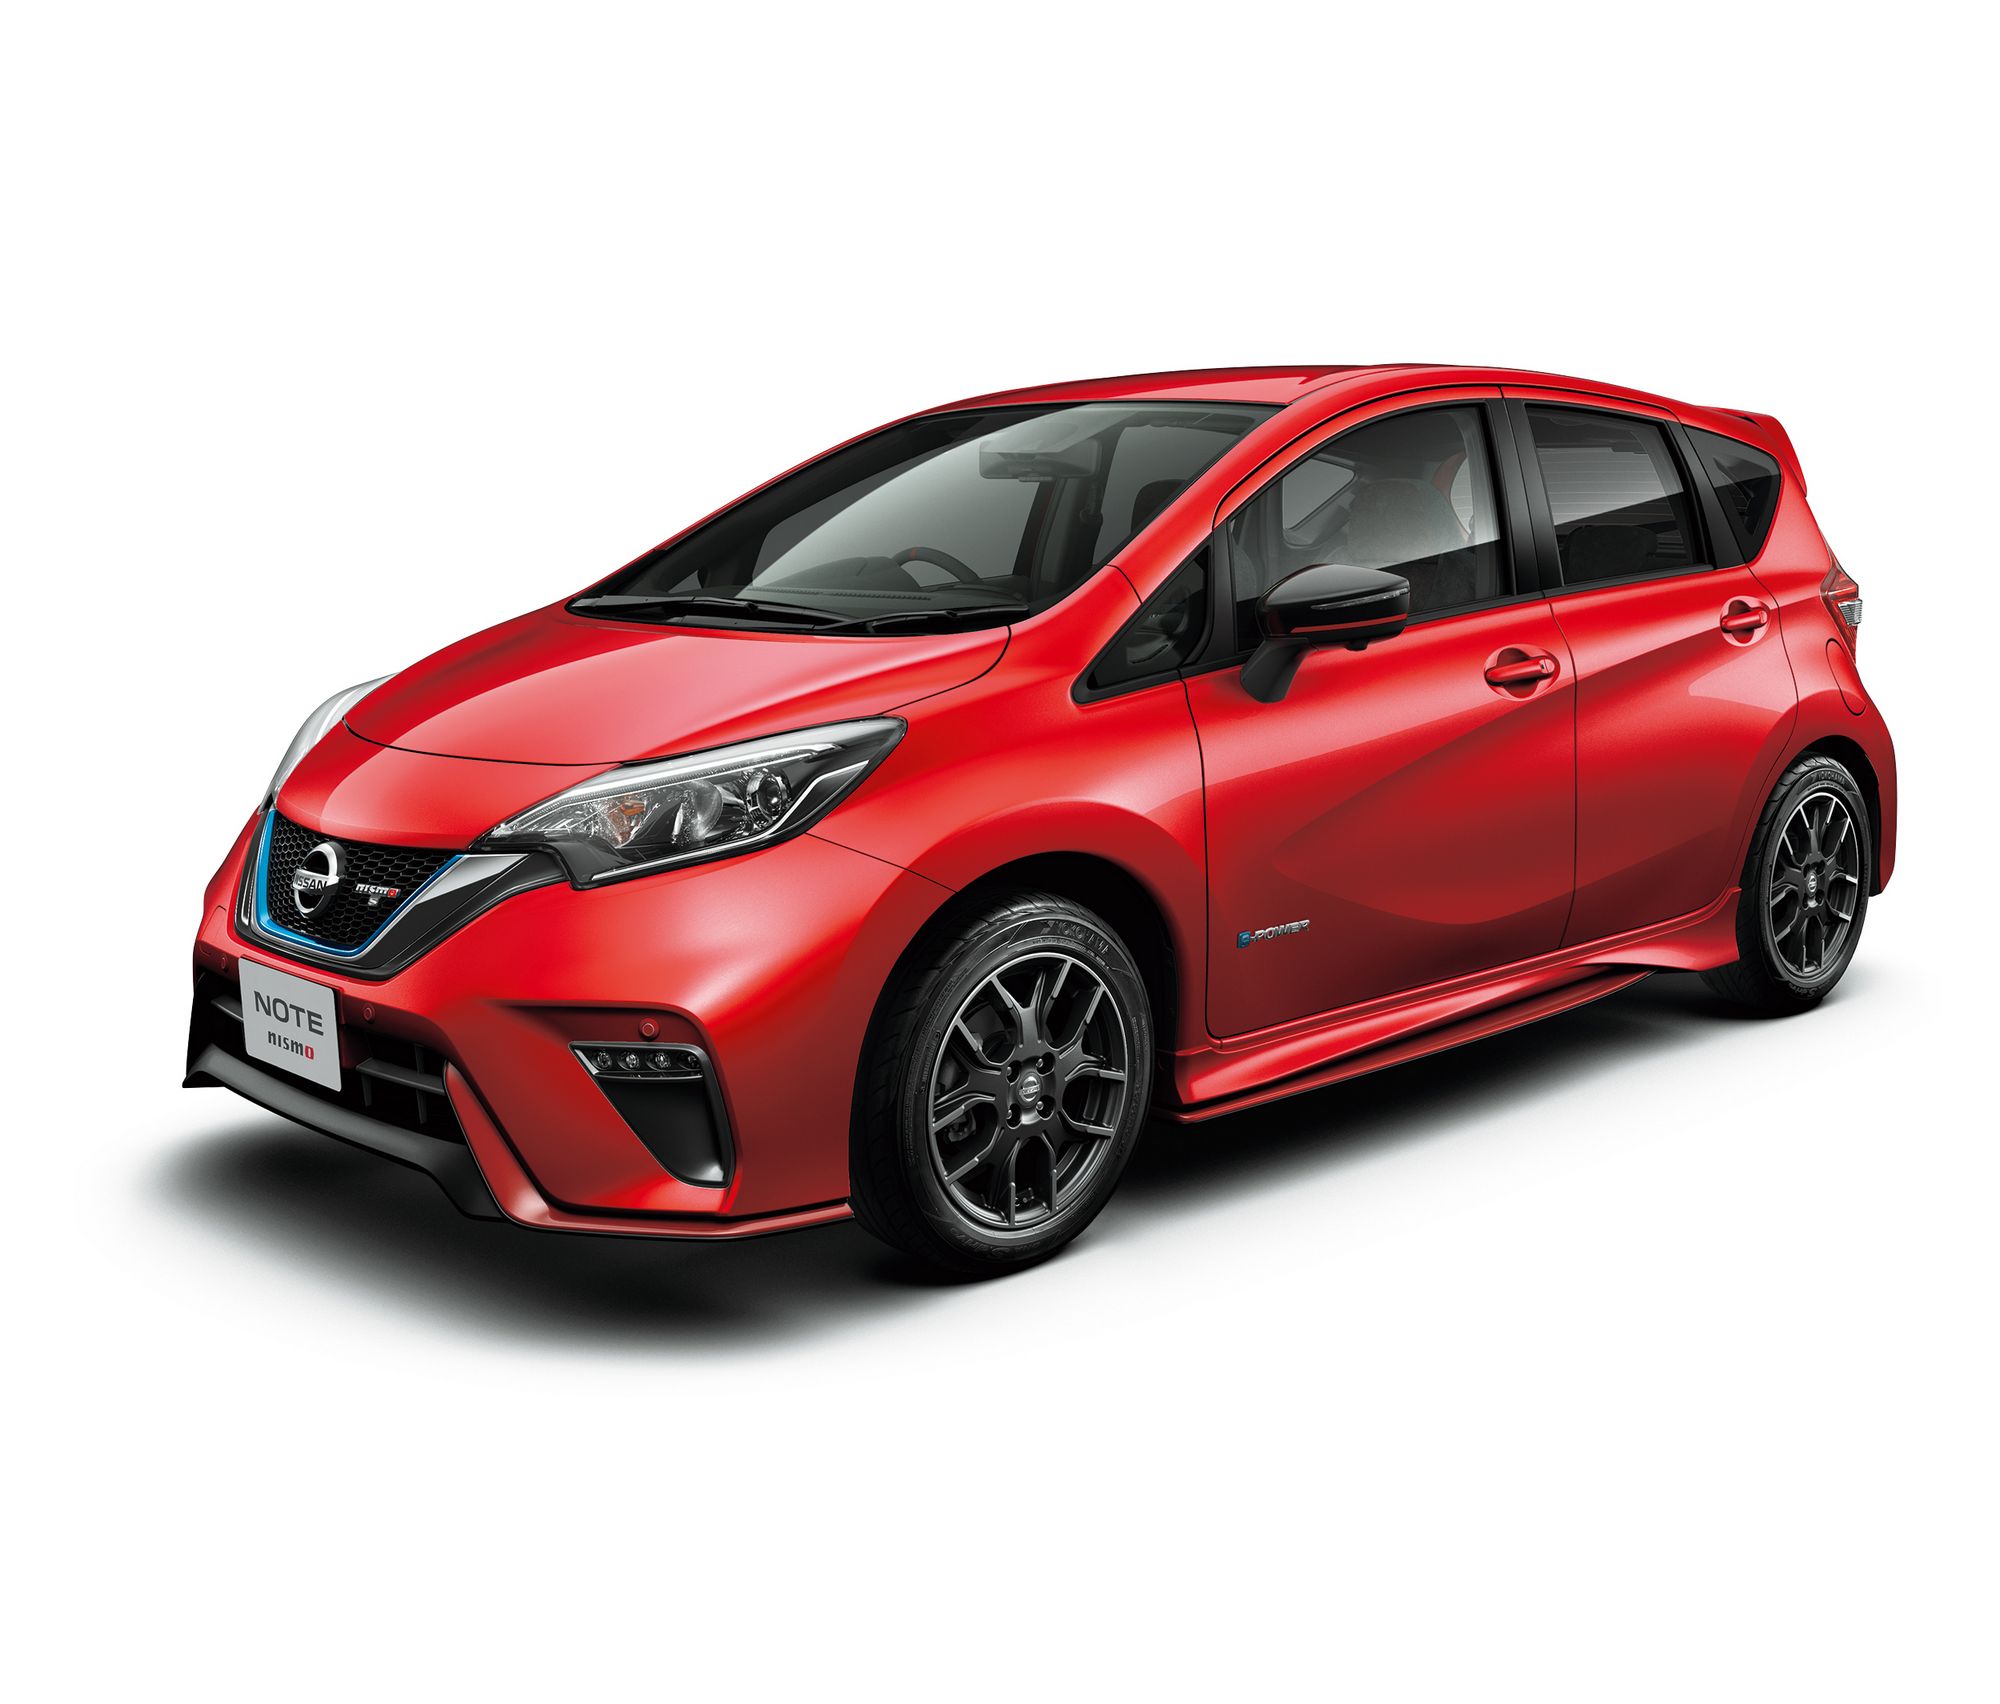 Nissan note he12. Nissan Note e-Power Nismo. Nissan Note e-Power 2019. Nissan Note e-Power 2018. Nissan Note e Power 2018 Nismo.